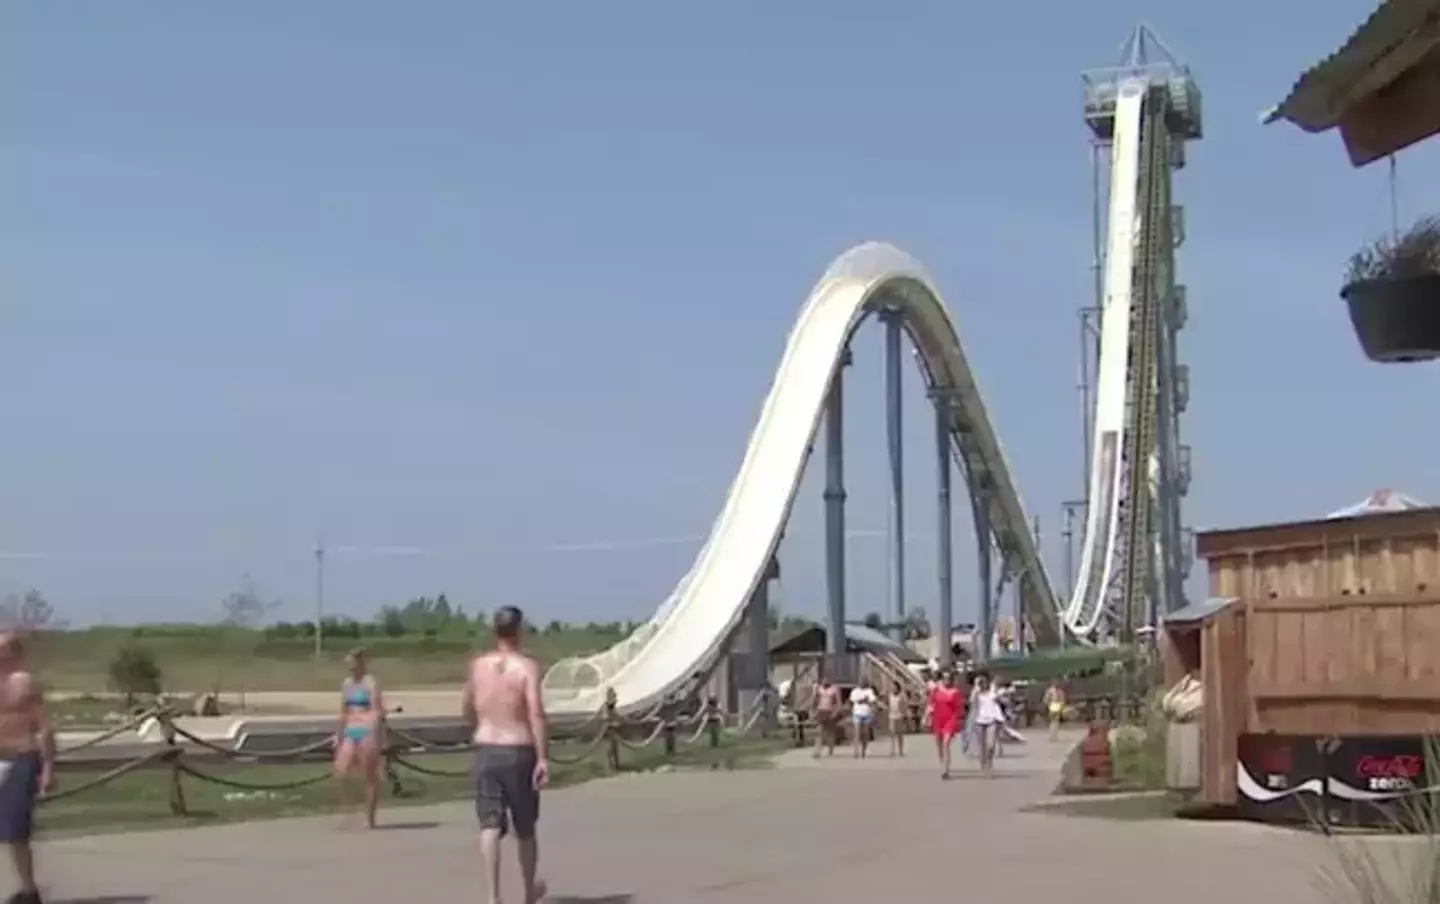 The Verrückt waterslide was shut down after Caleb's death and later demolished.